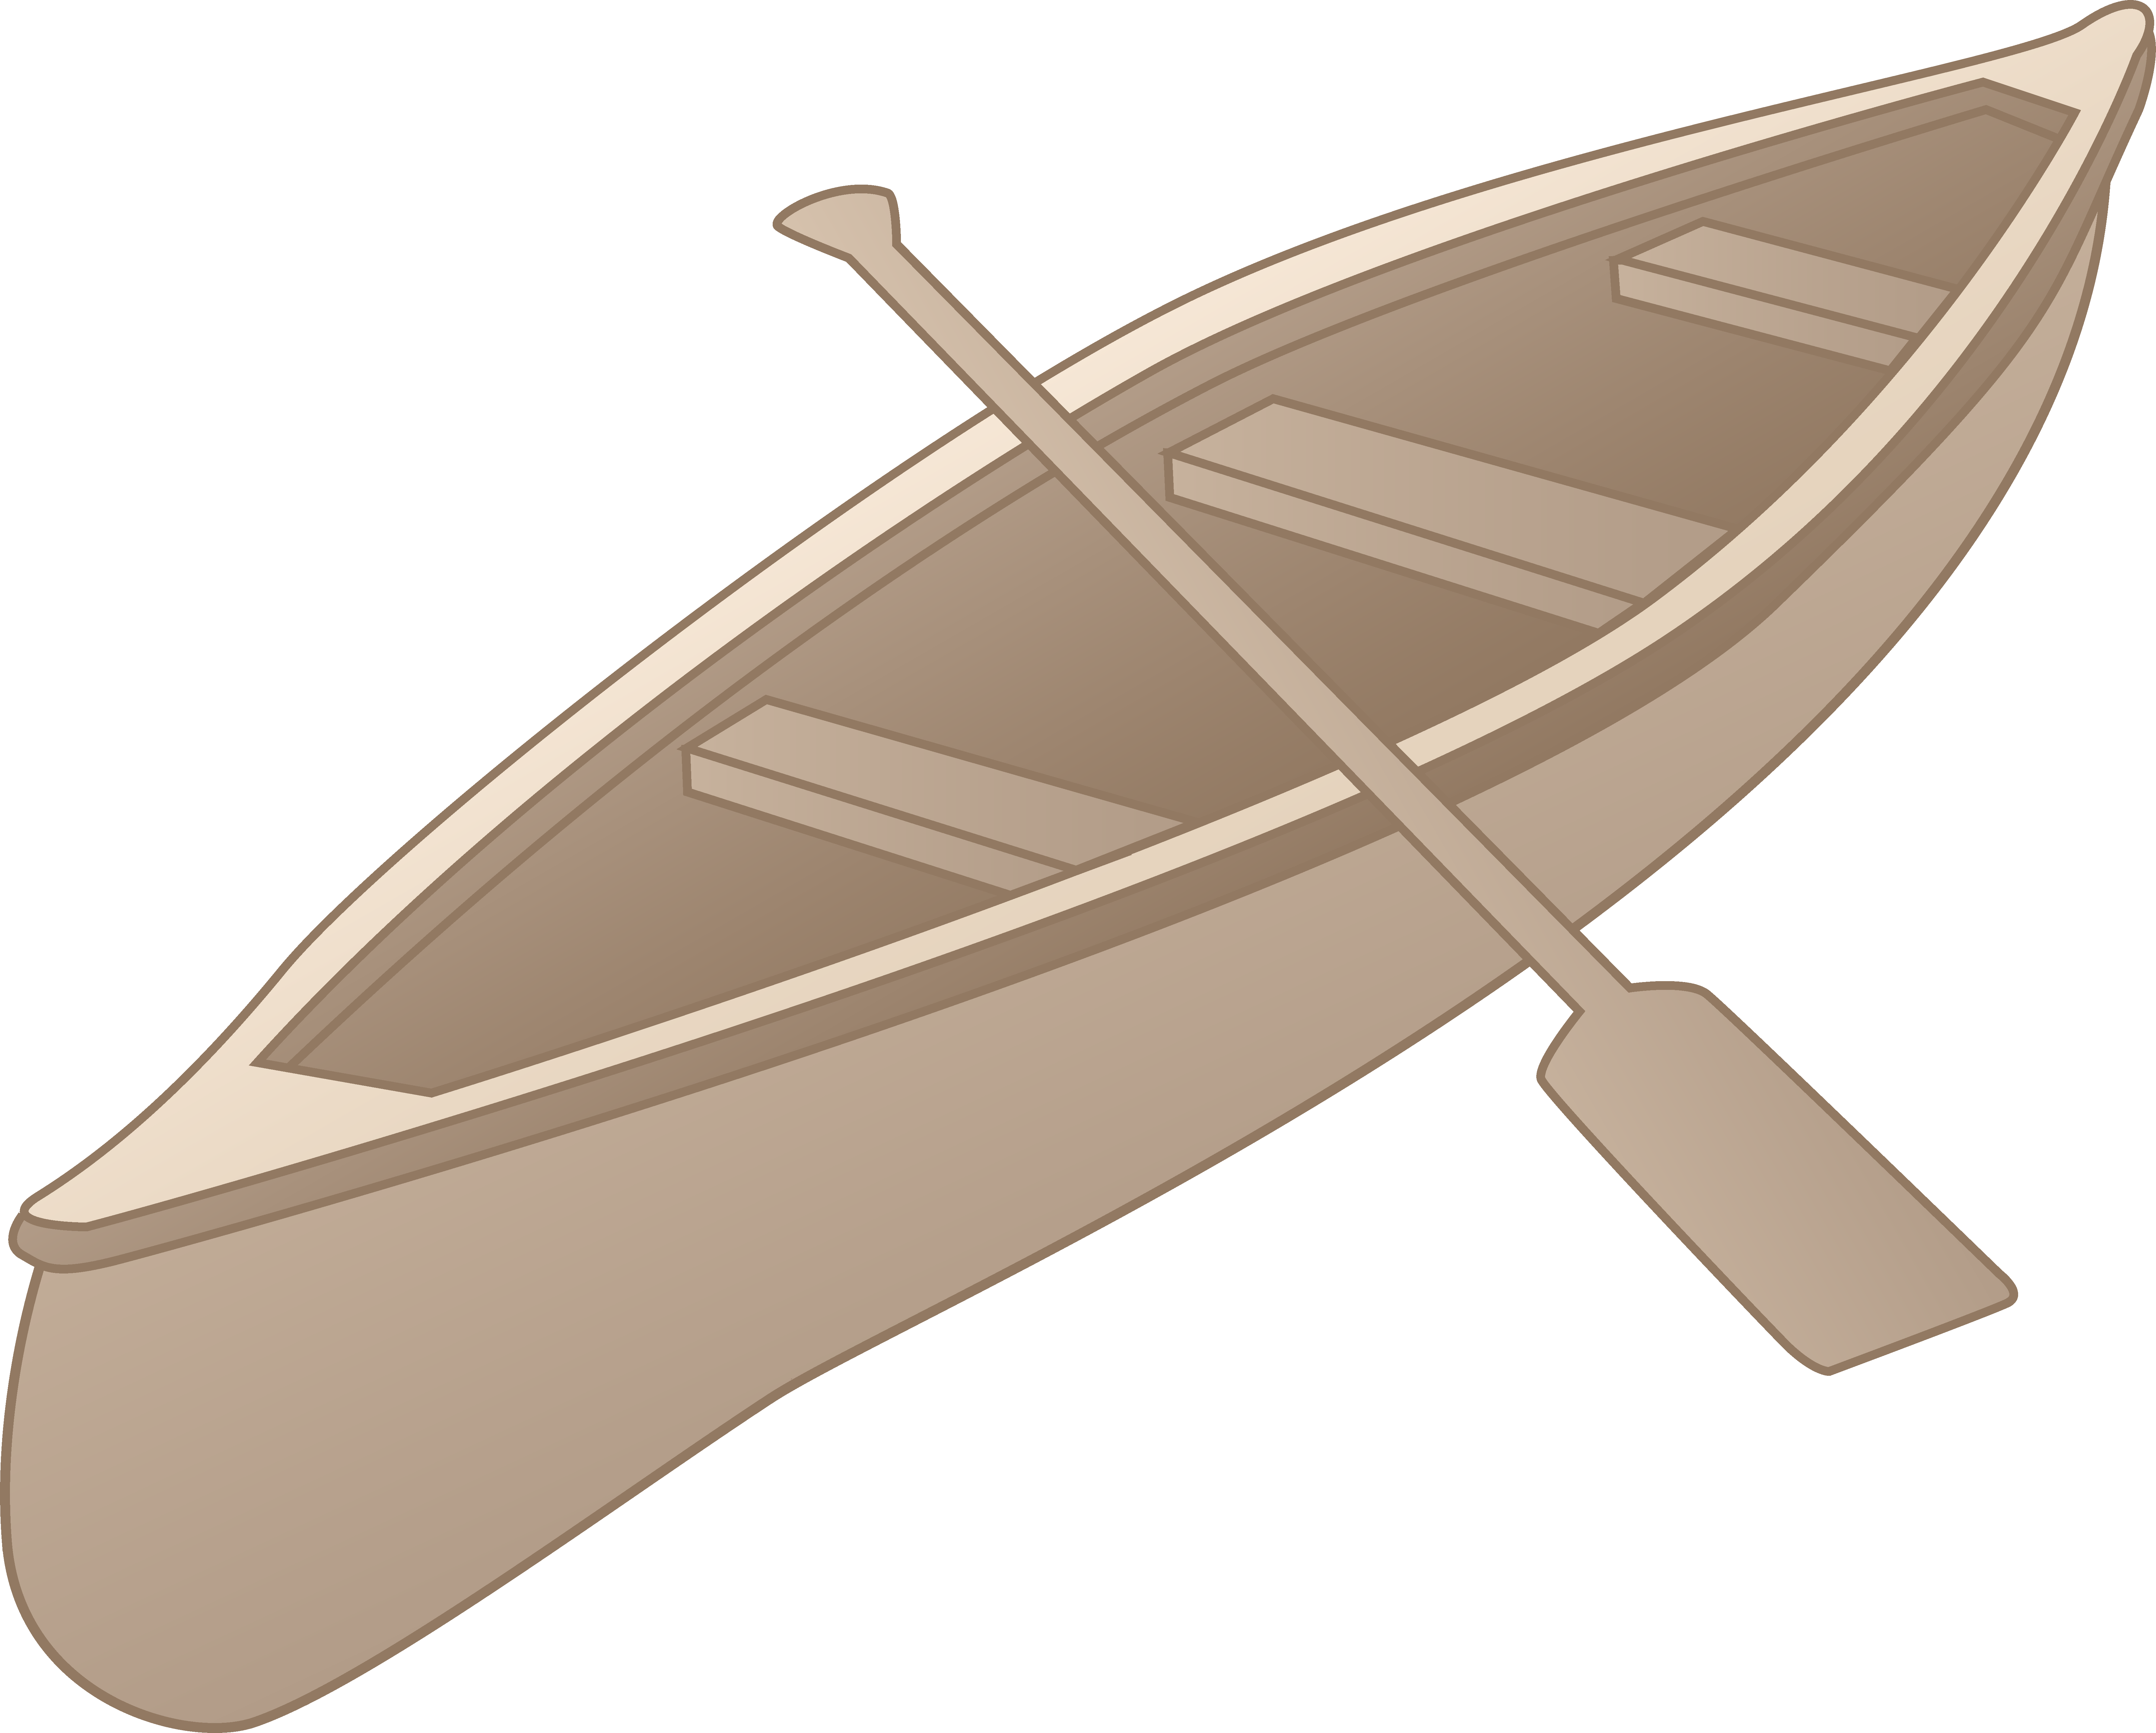 Clip Arts Related To : paddle boat clip art. 